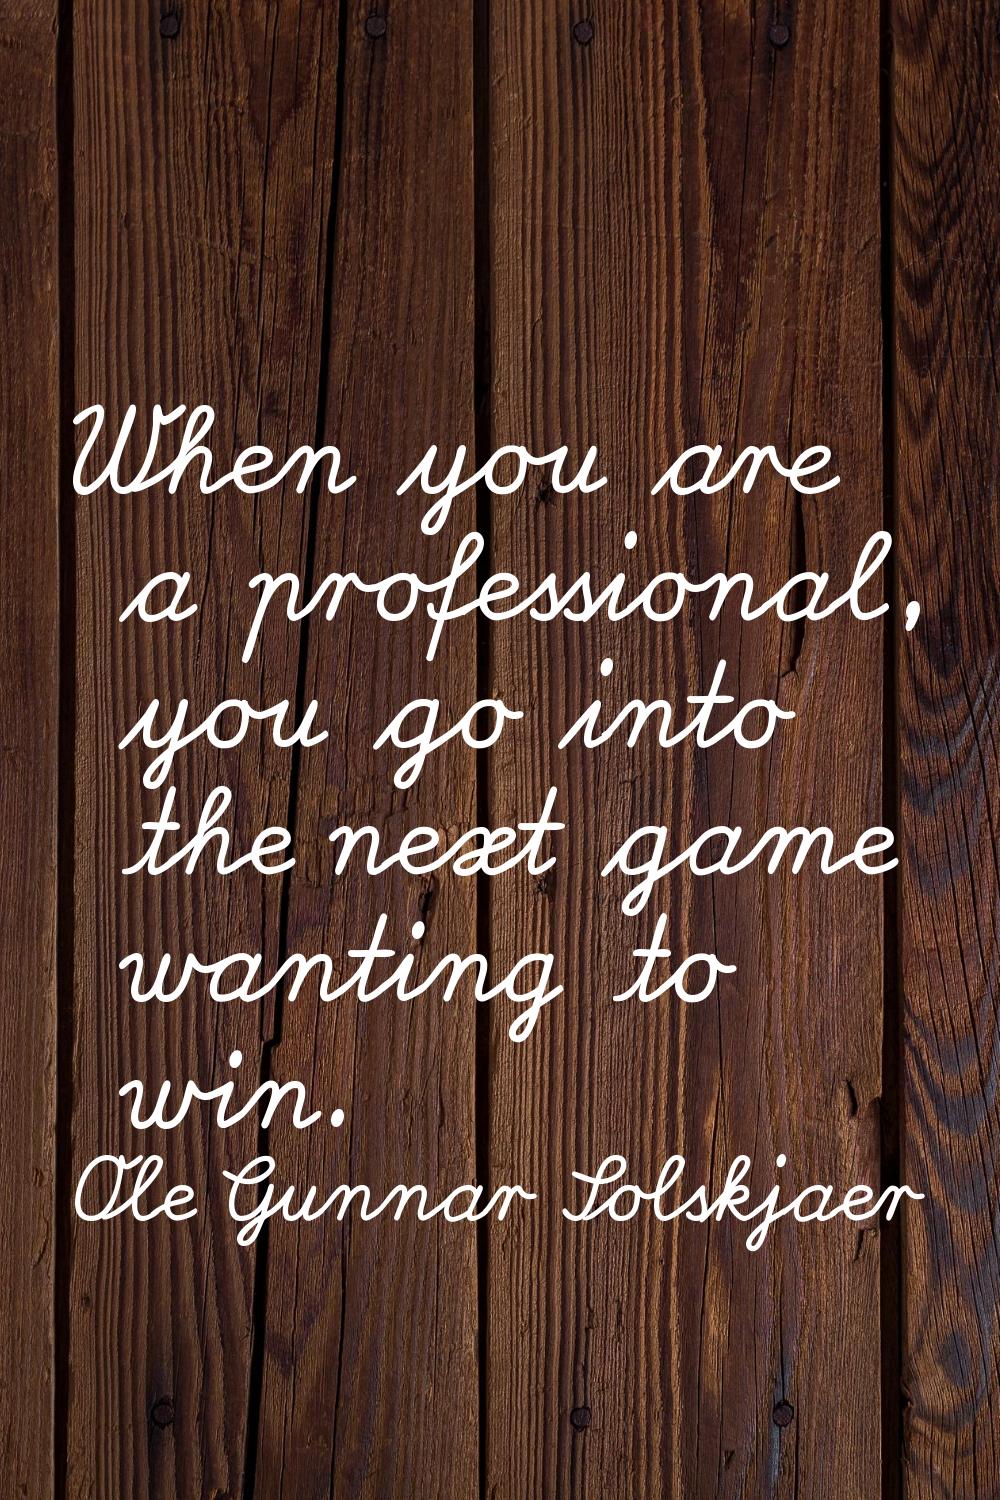 When you are a professional, you go into the next game wanting to win.